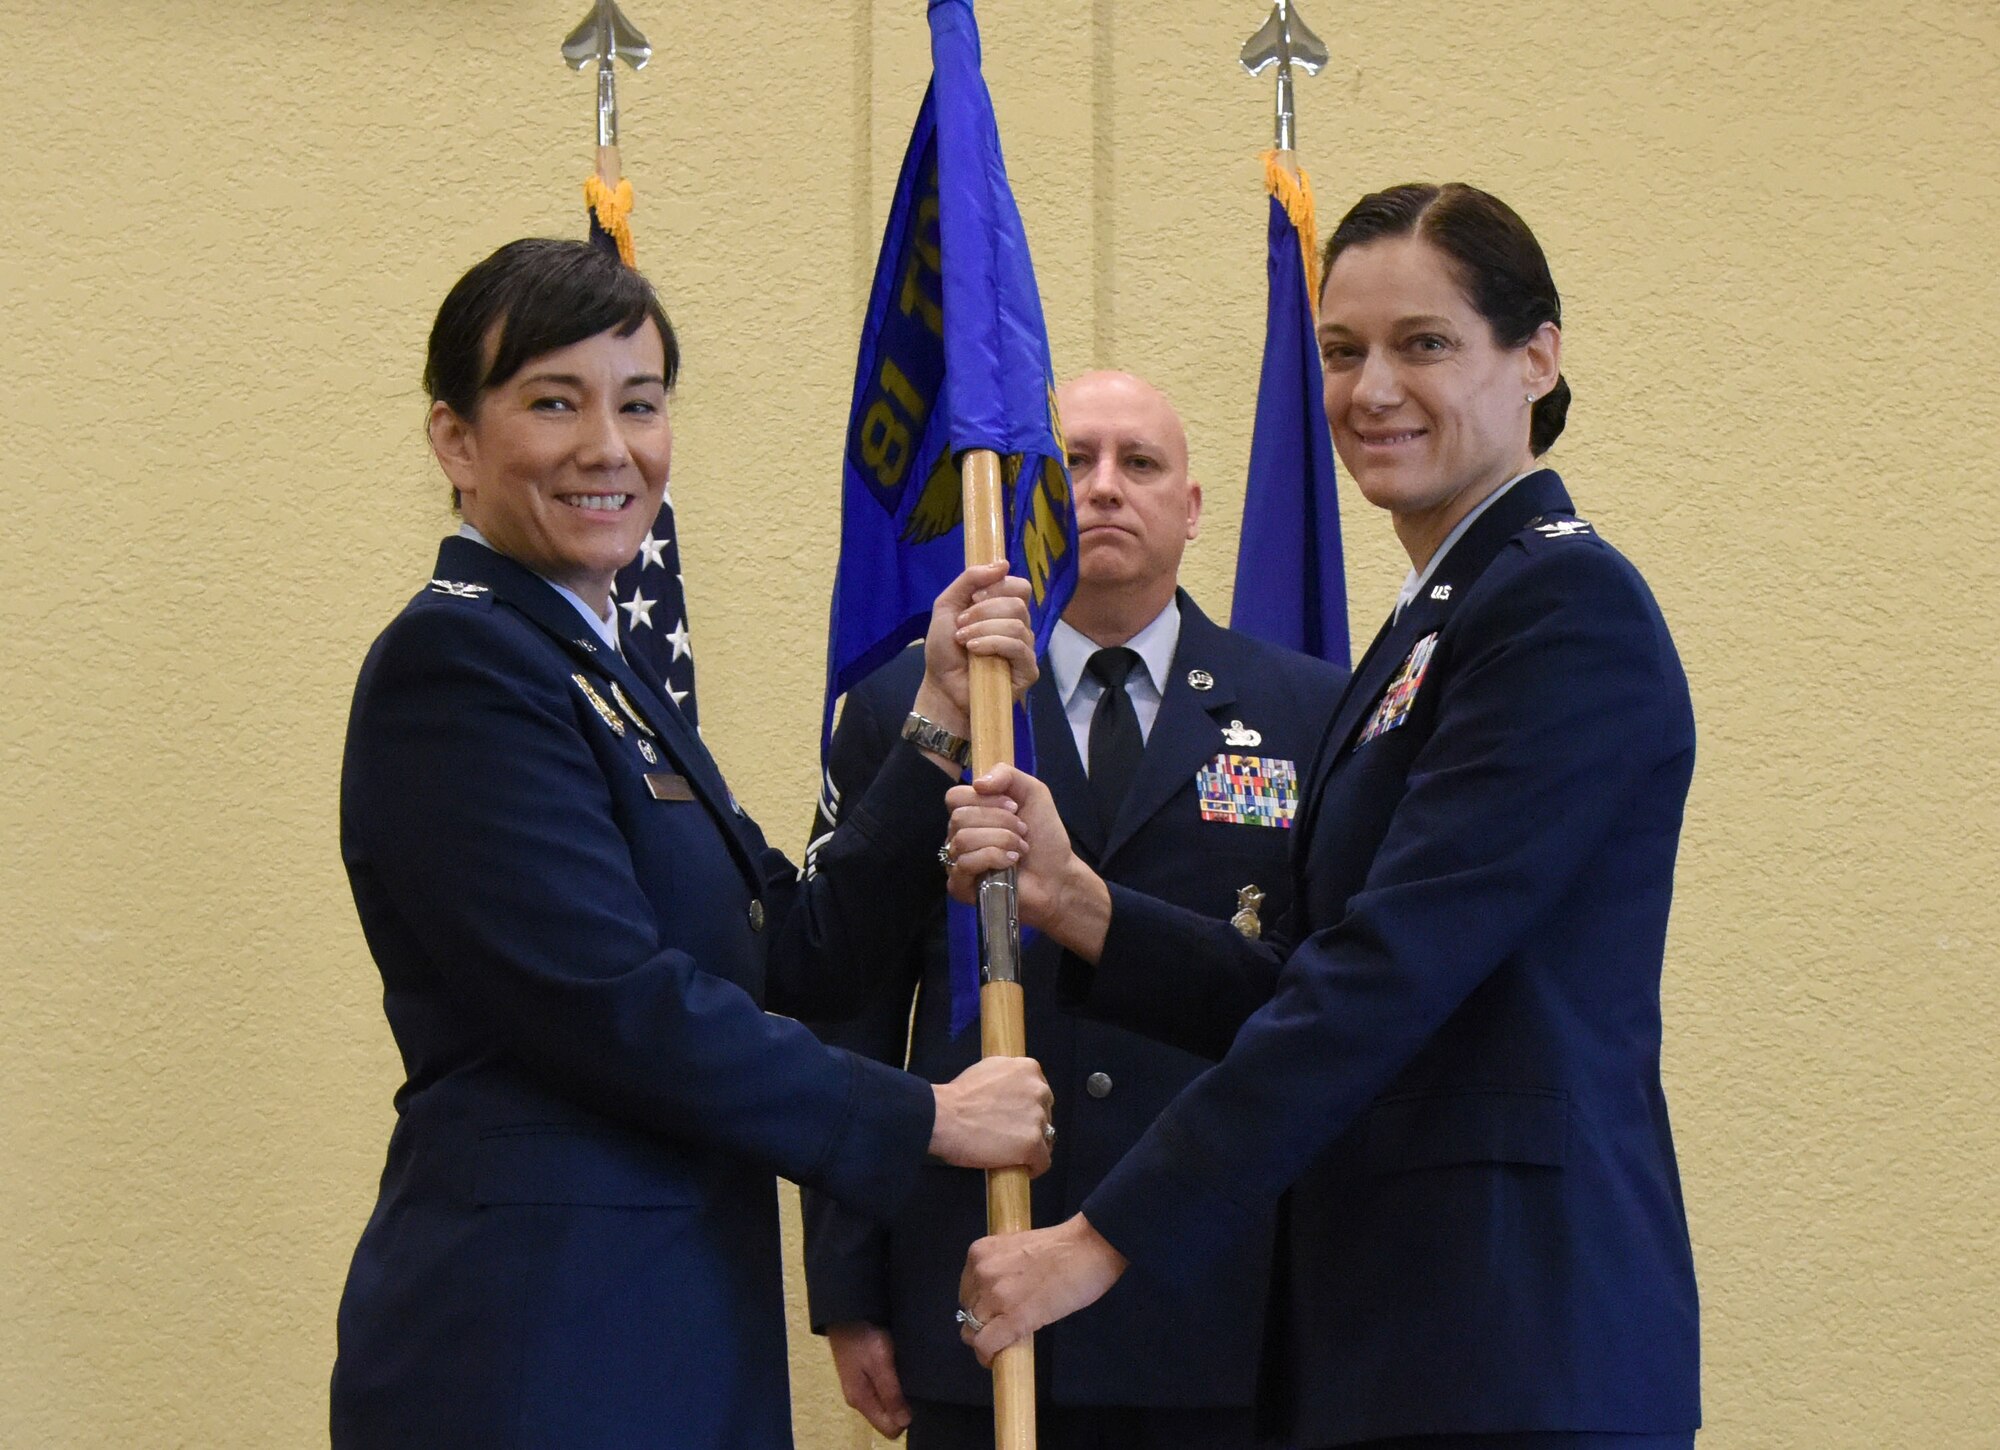 U.S. Air Force Col. Debra Lovette, 81st Training Wing commander, passes the 81st Mission Support Group guidon to Col. Marcia Quigley, 81st MSG commander, during the 81st MSG change of command ceremony in the Bay Breeze Event Center at Keesler Air Force Base, Mississippi, July 19, 2018. The passing of the guidon is a ceremonial symbol of exchanging command from one commander to another. (U.S. Air Force photo by Kemberly Groue)